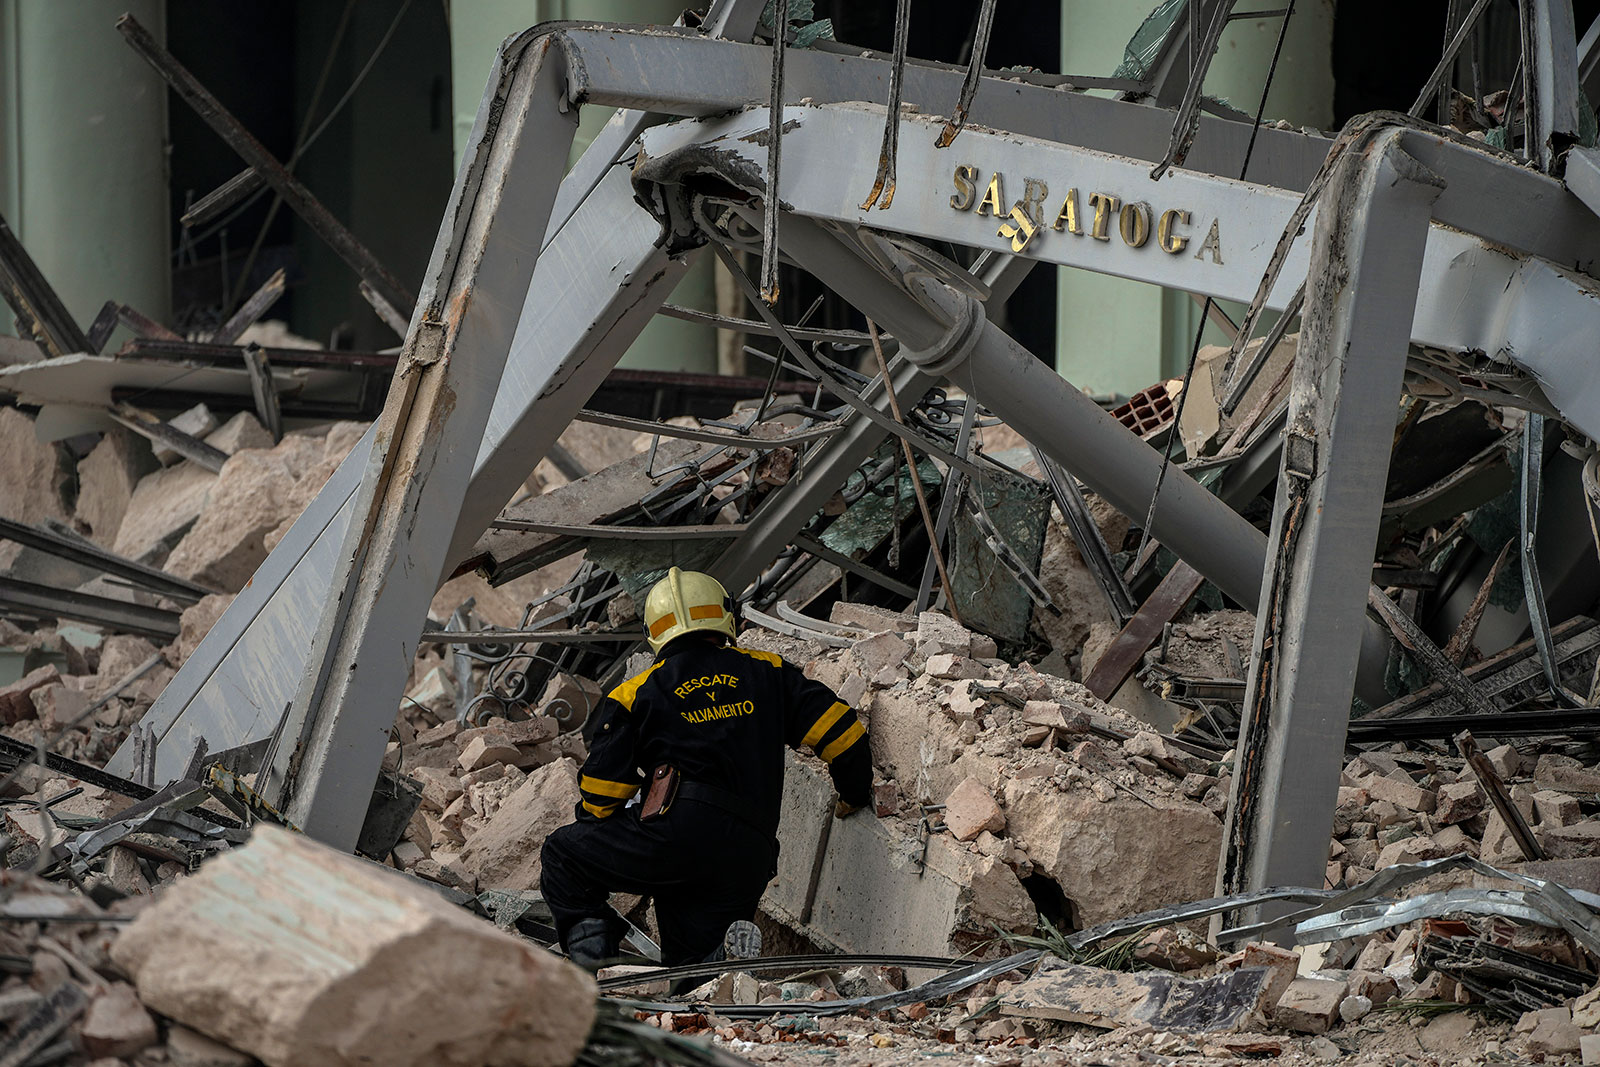 A member of a rescue team searches for survivors at the site of a deadly explosion that destroyed the Hotel Saratoga, in Havana, Cuba, on Friday, May 6. 